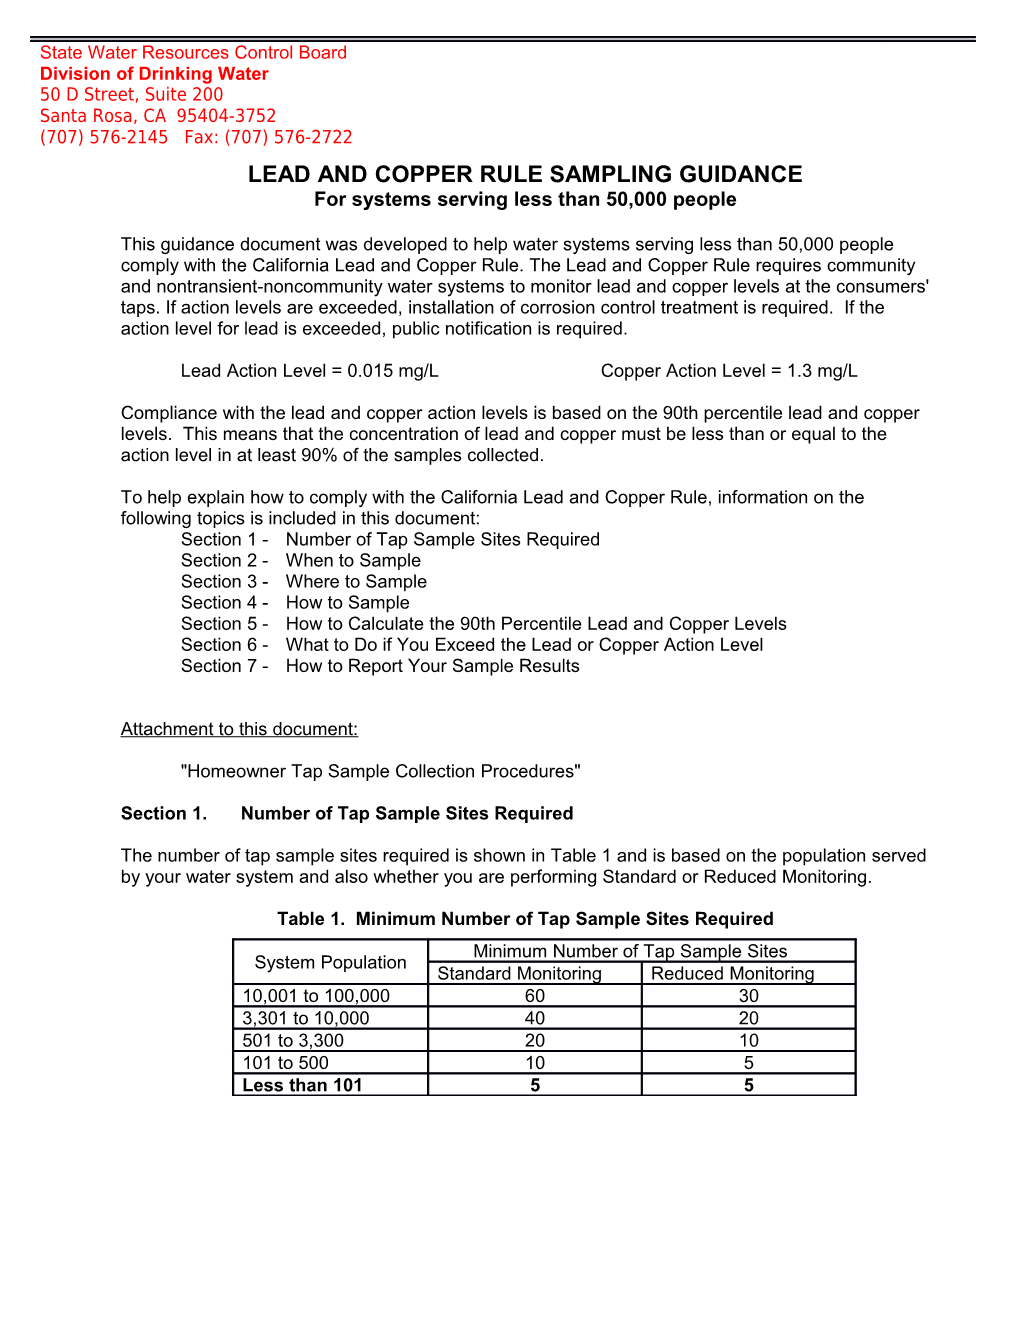 Lead and Copper Sampling Guidance